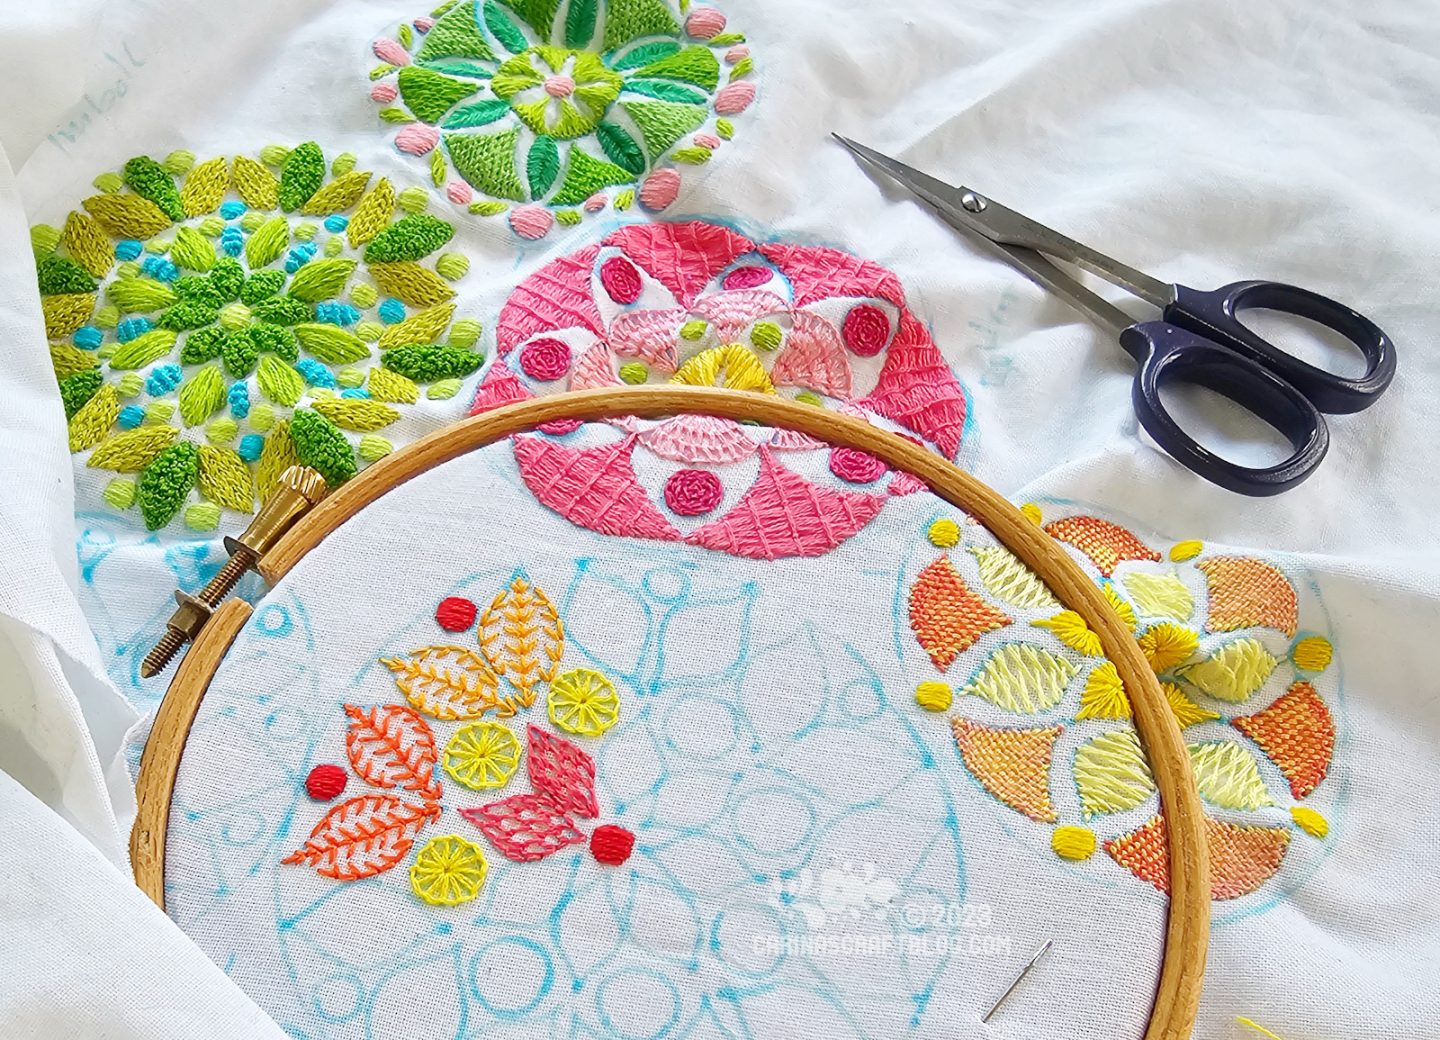 Overhead view of an embroidery hoop with white fabric embroidered with round mandala inspired motifs in pink, yellow and green colours.